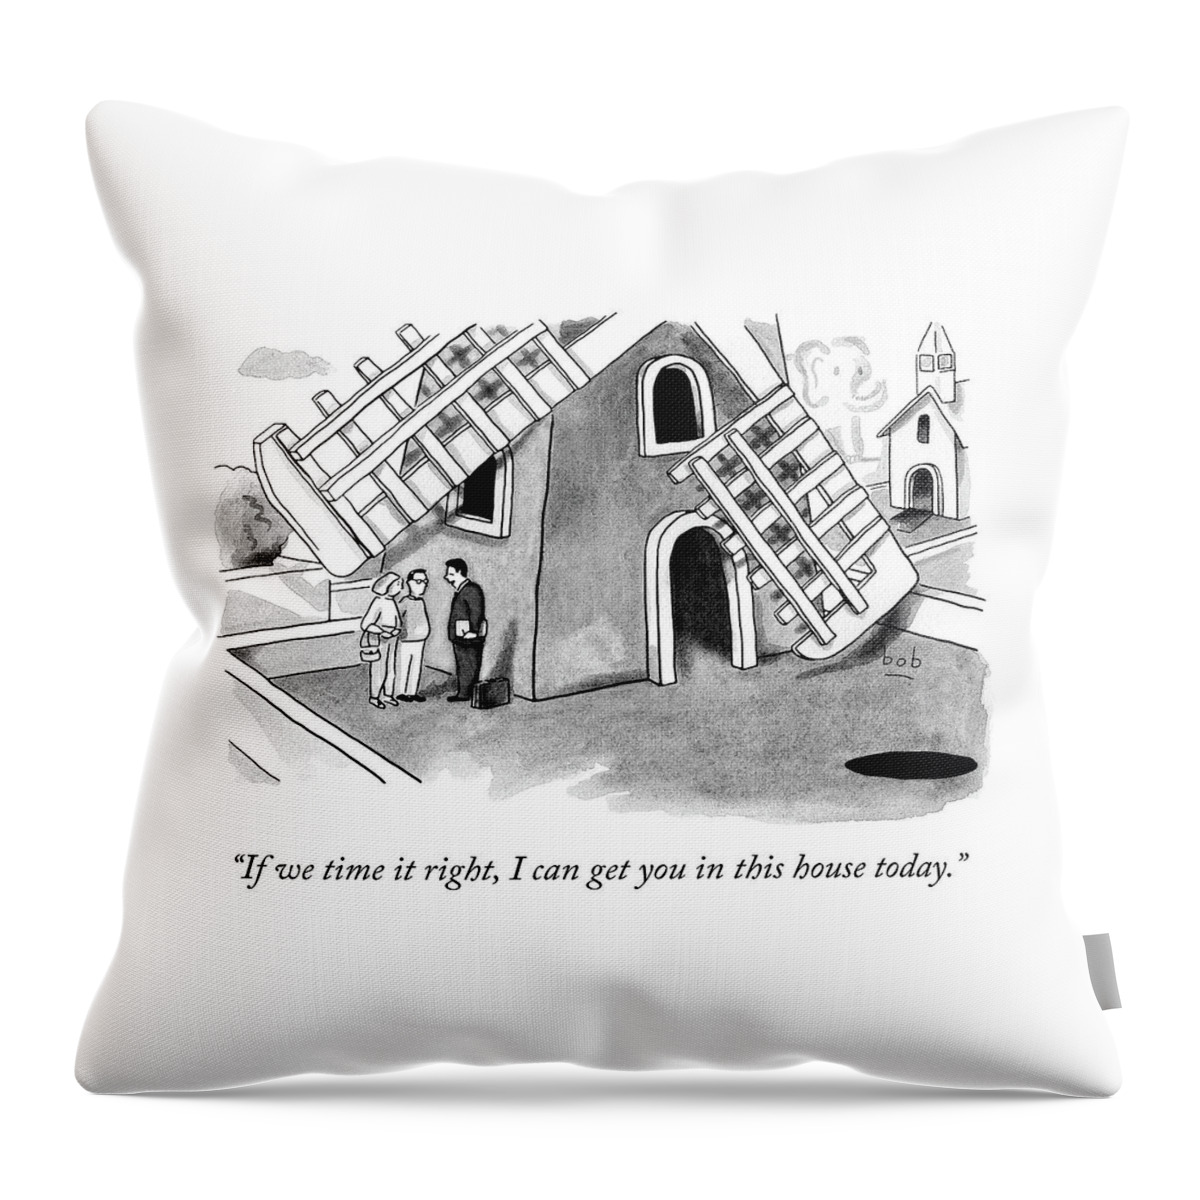 If We Time It Right Throw Pillow